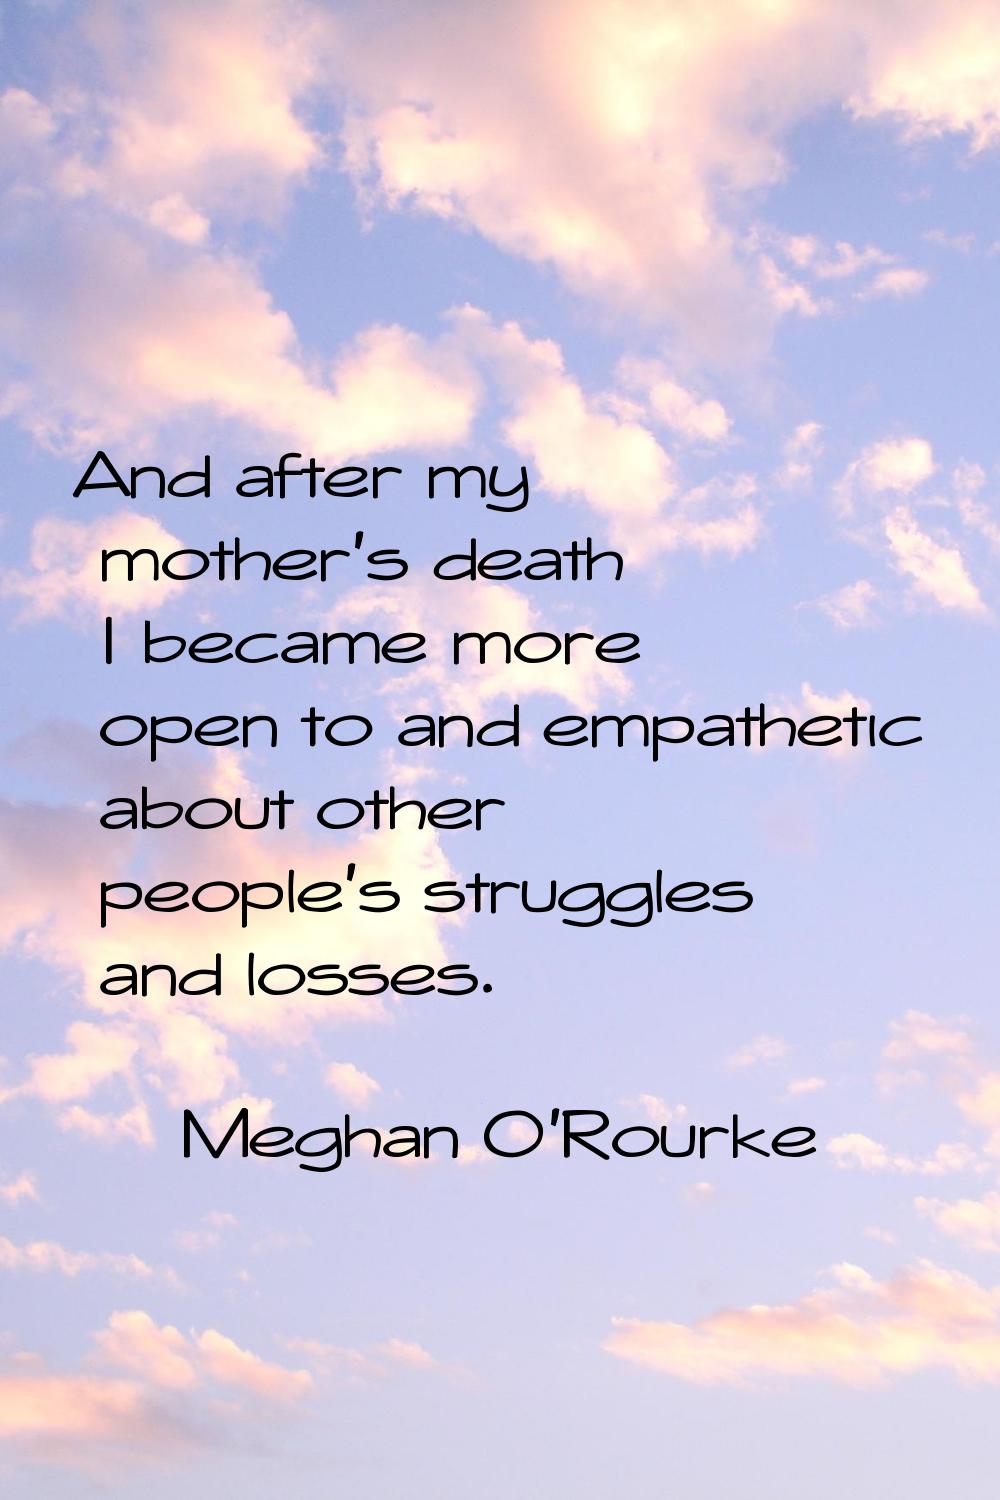 And after my mother's death I became more open to and empathetic about other people's struggles and